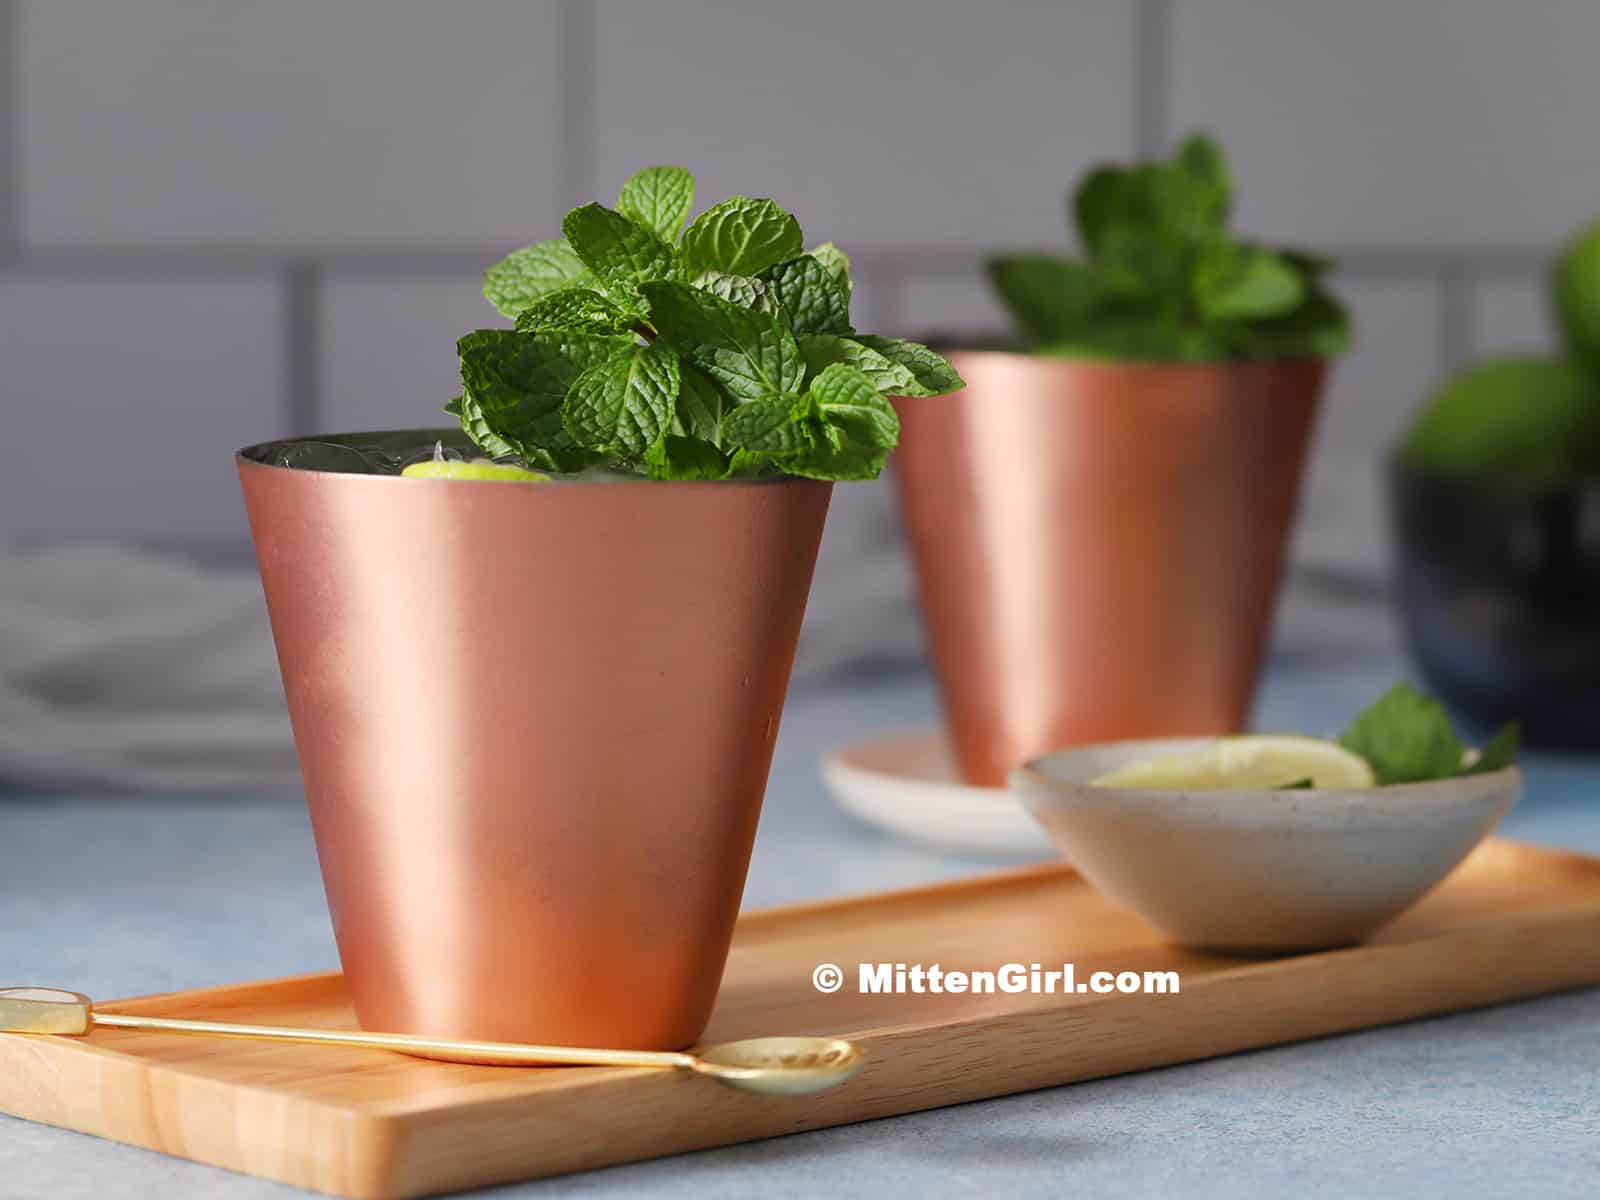 Copper cups filled with moscow mule mocktails and garnished with mint.